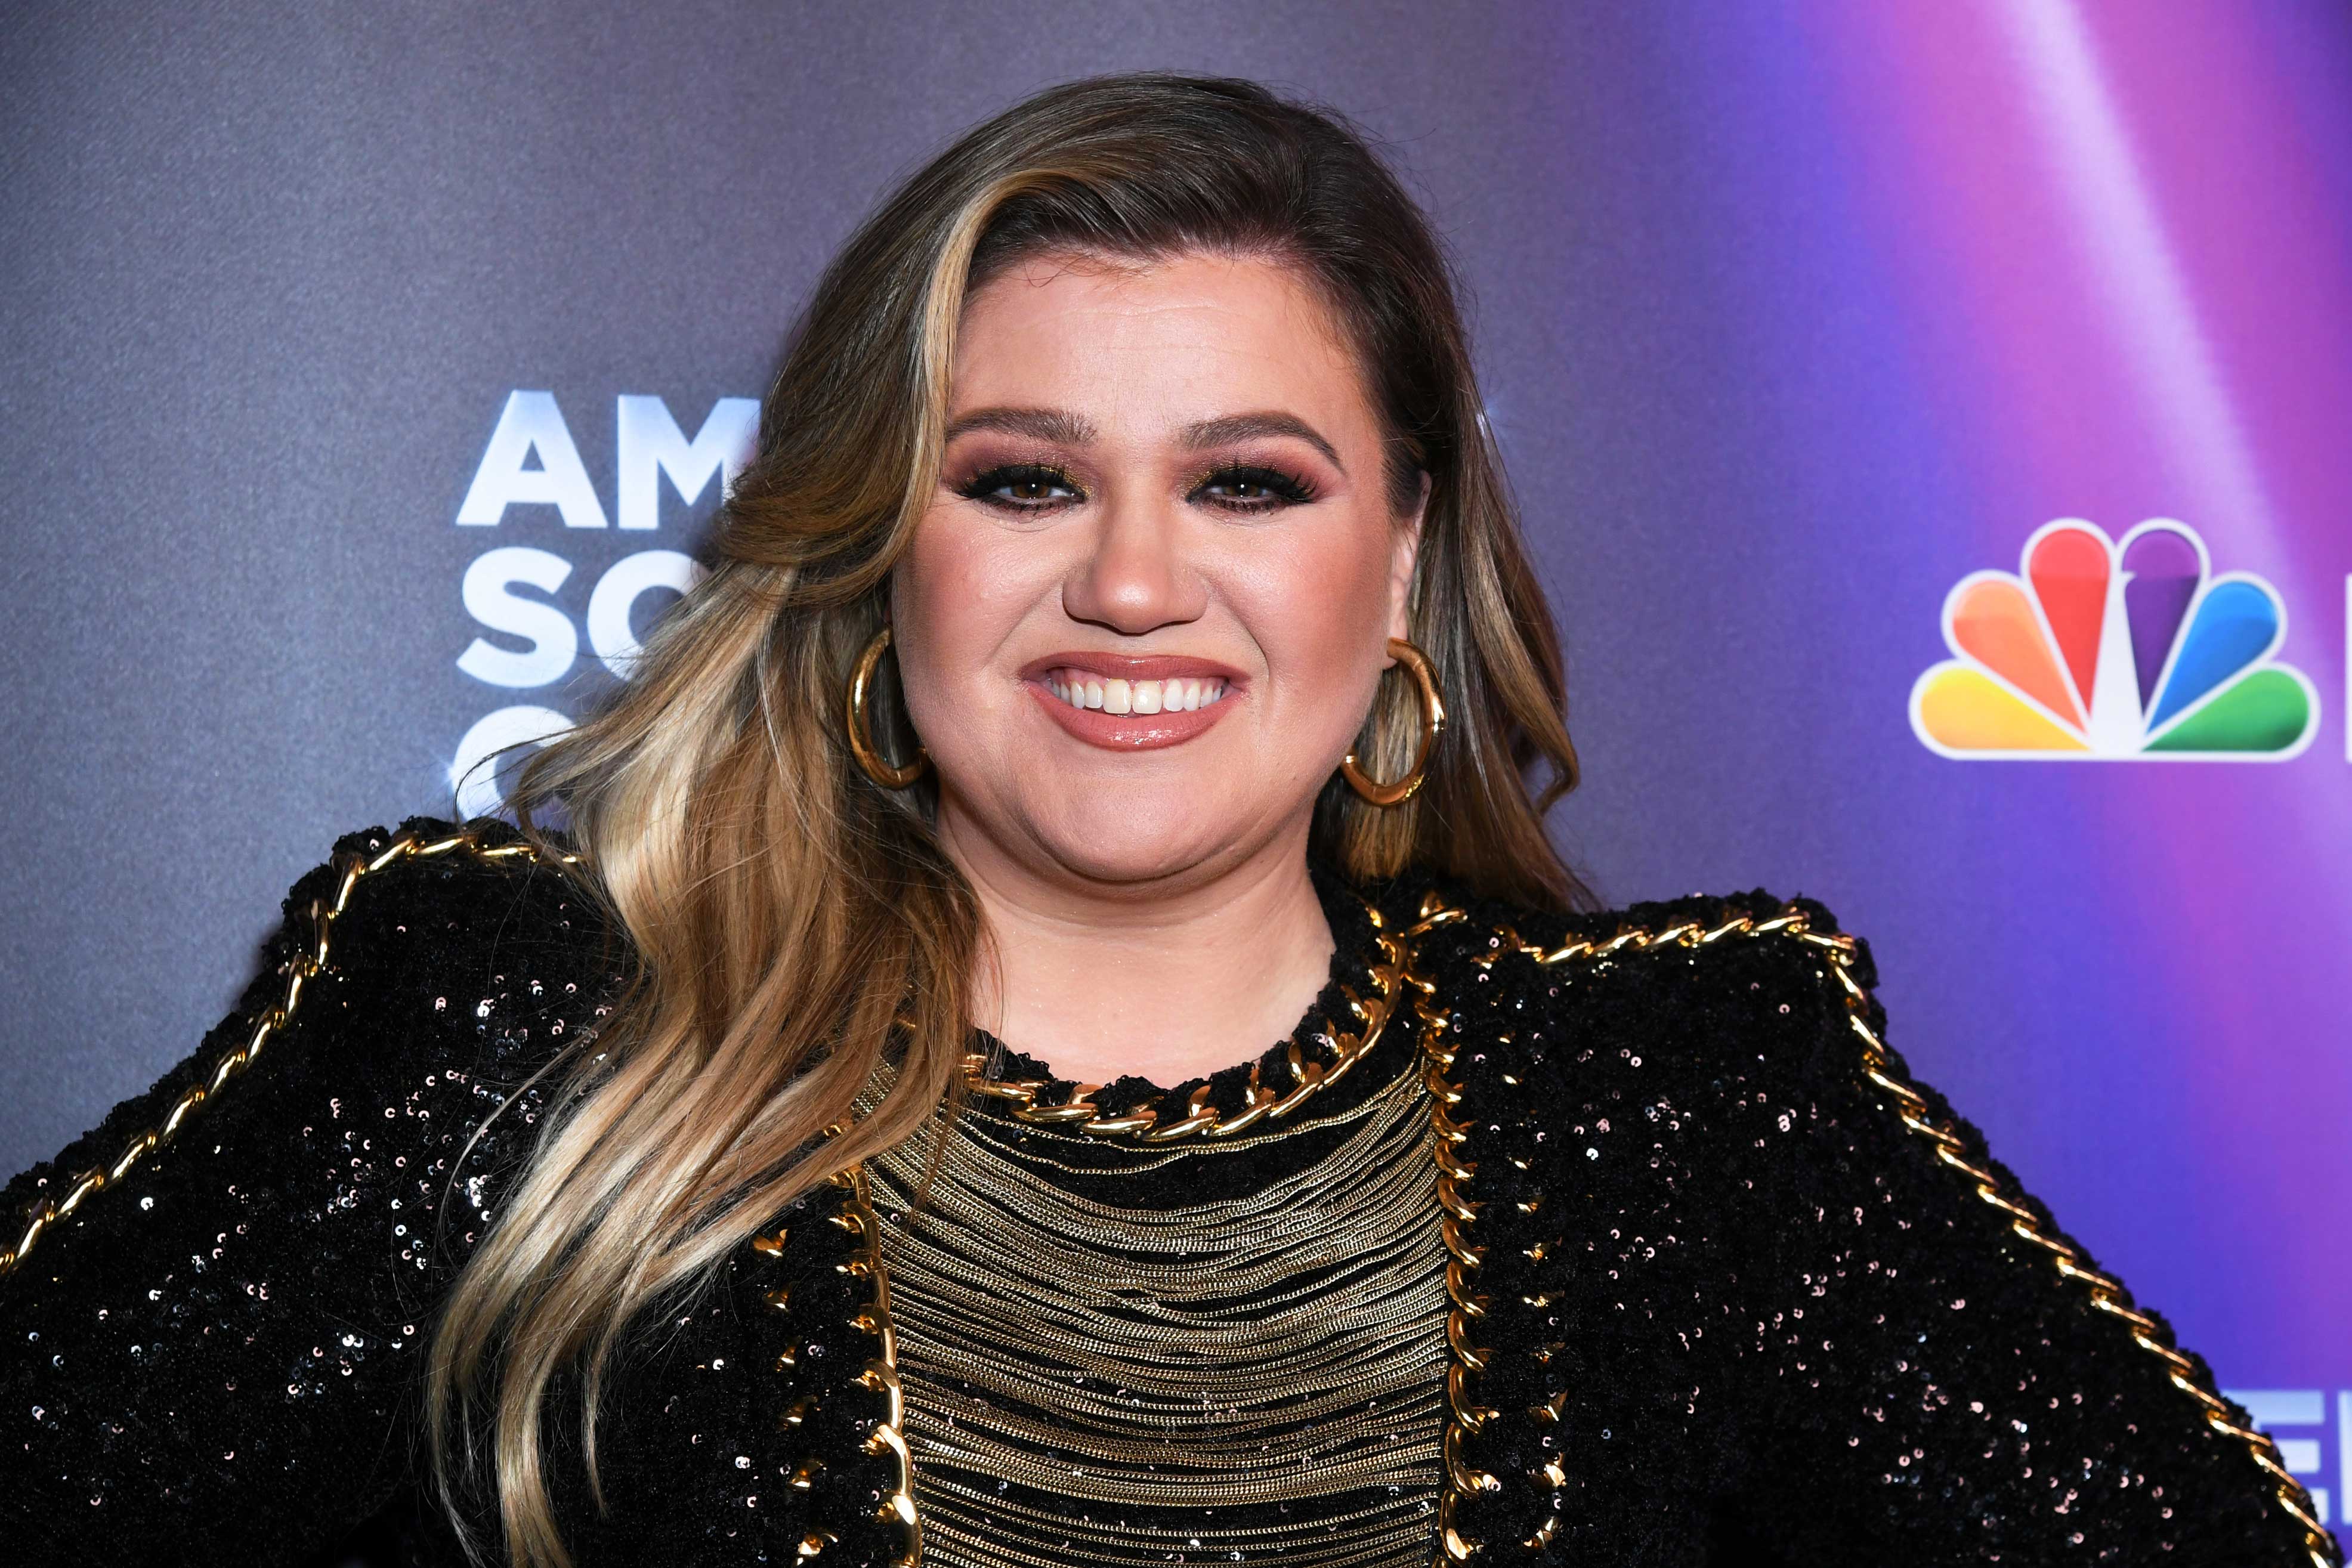 Kelly Clarkson On Why She's Not Going on Tour for Her Album | NBC Insider